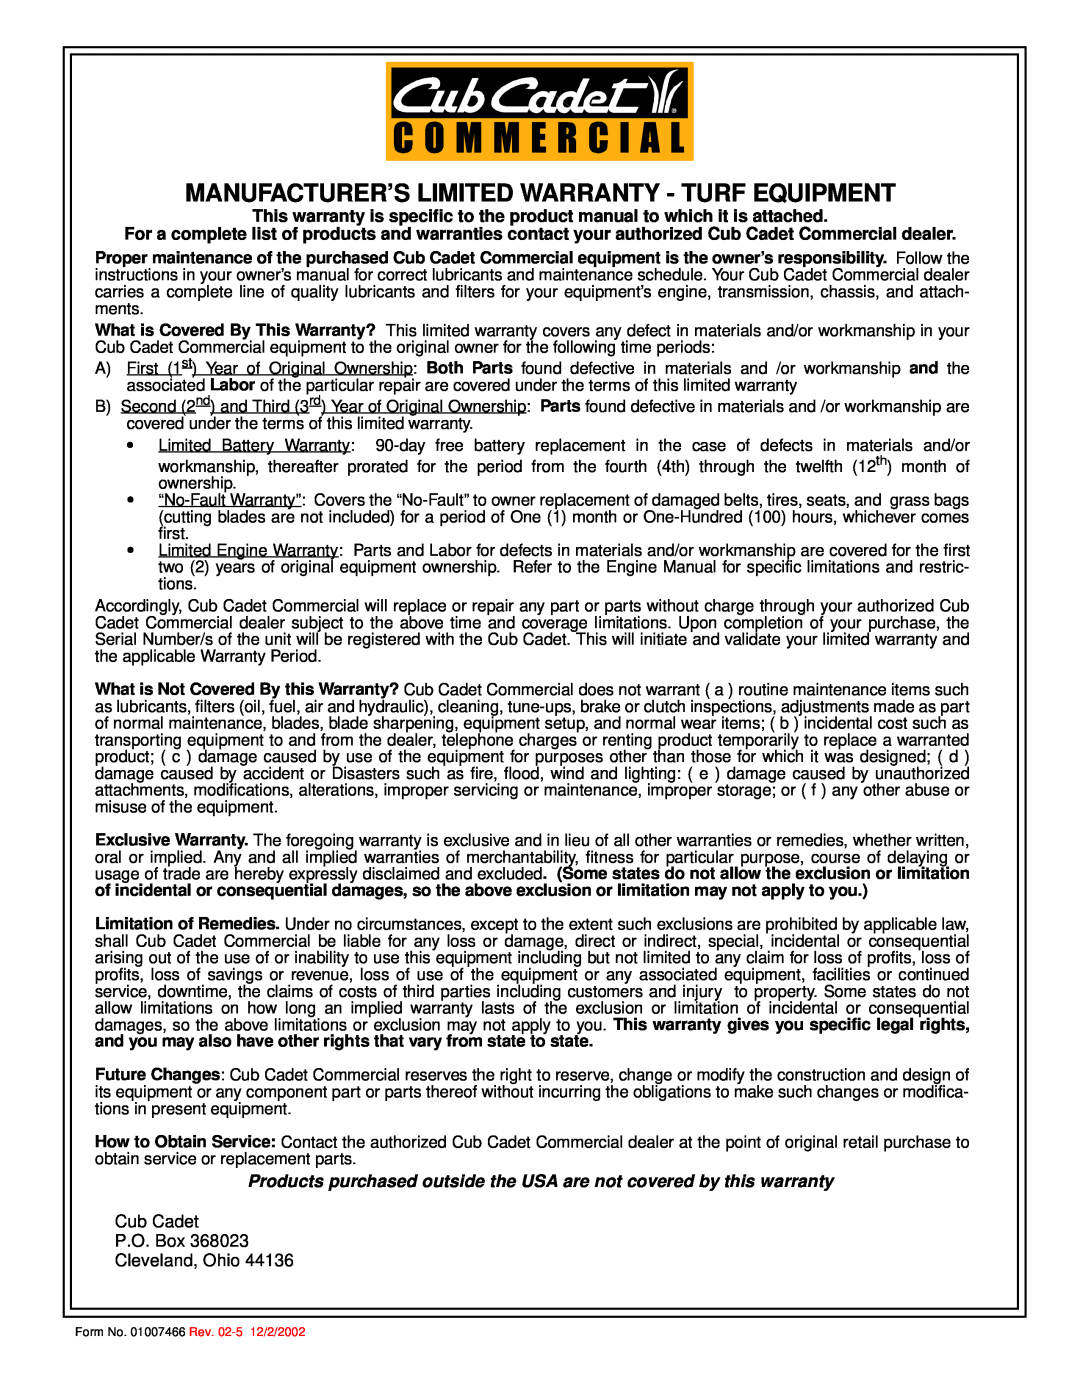 Cub Cadet service manual Manufacturer’S Limited Warranty - Turf Equipment 